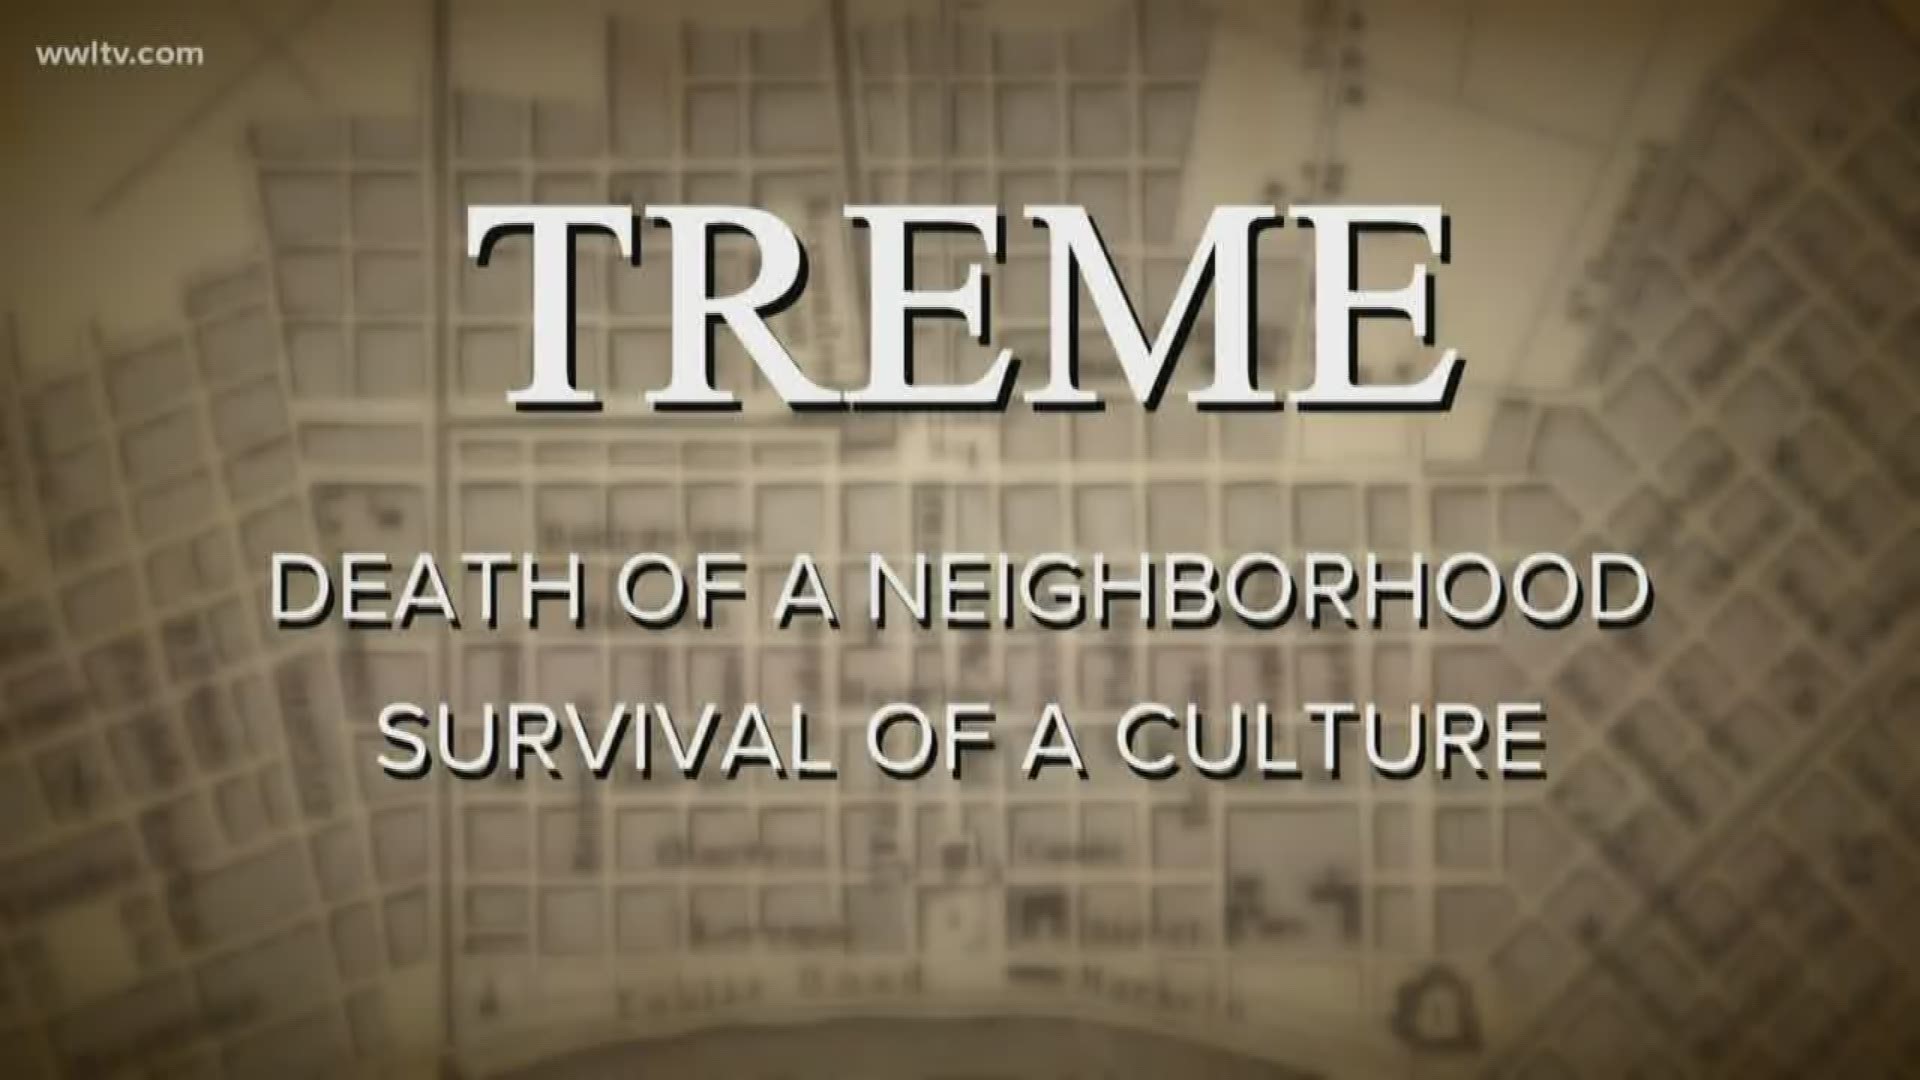 Katrina made way for a different type of flood. But if the soul of Tremé is lost, the fight to keep the culture born here goes on.